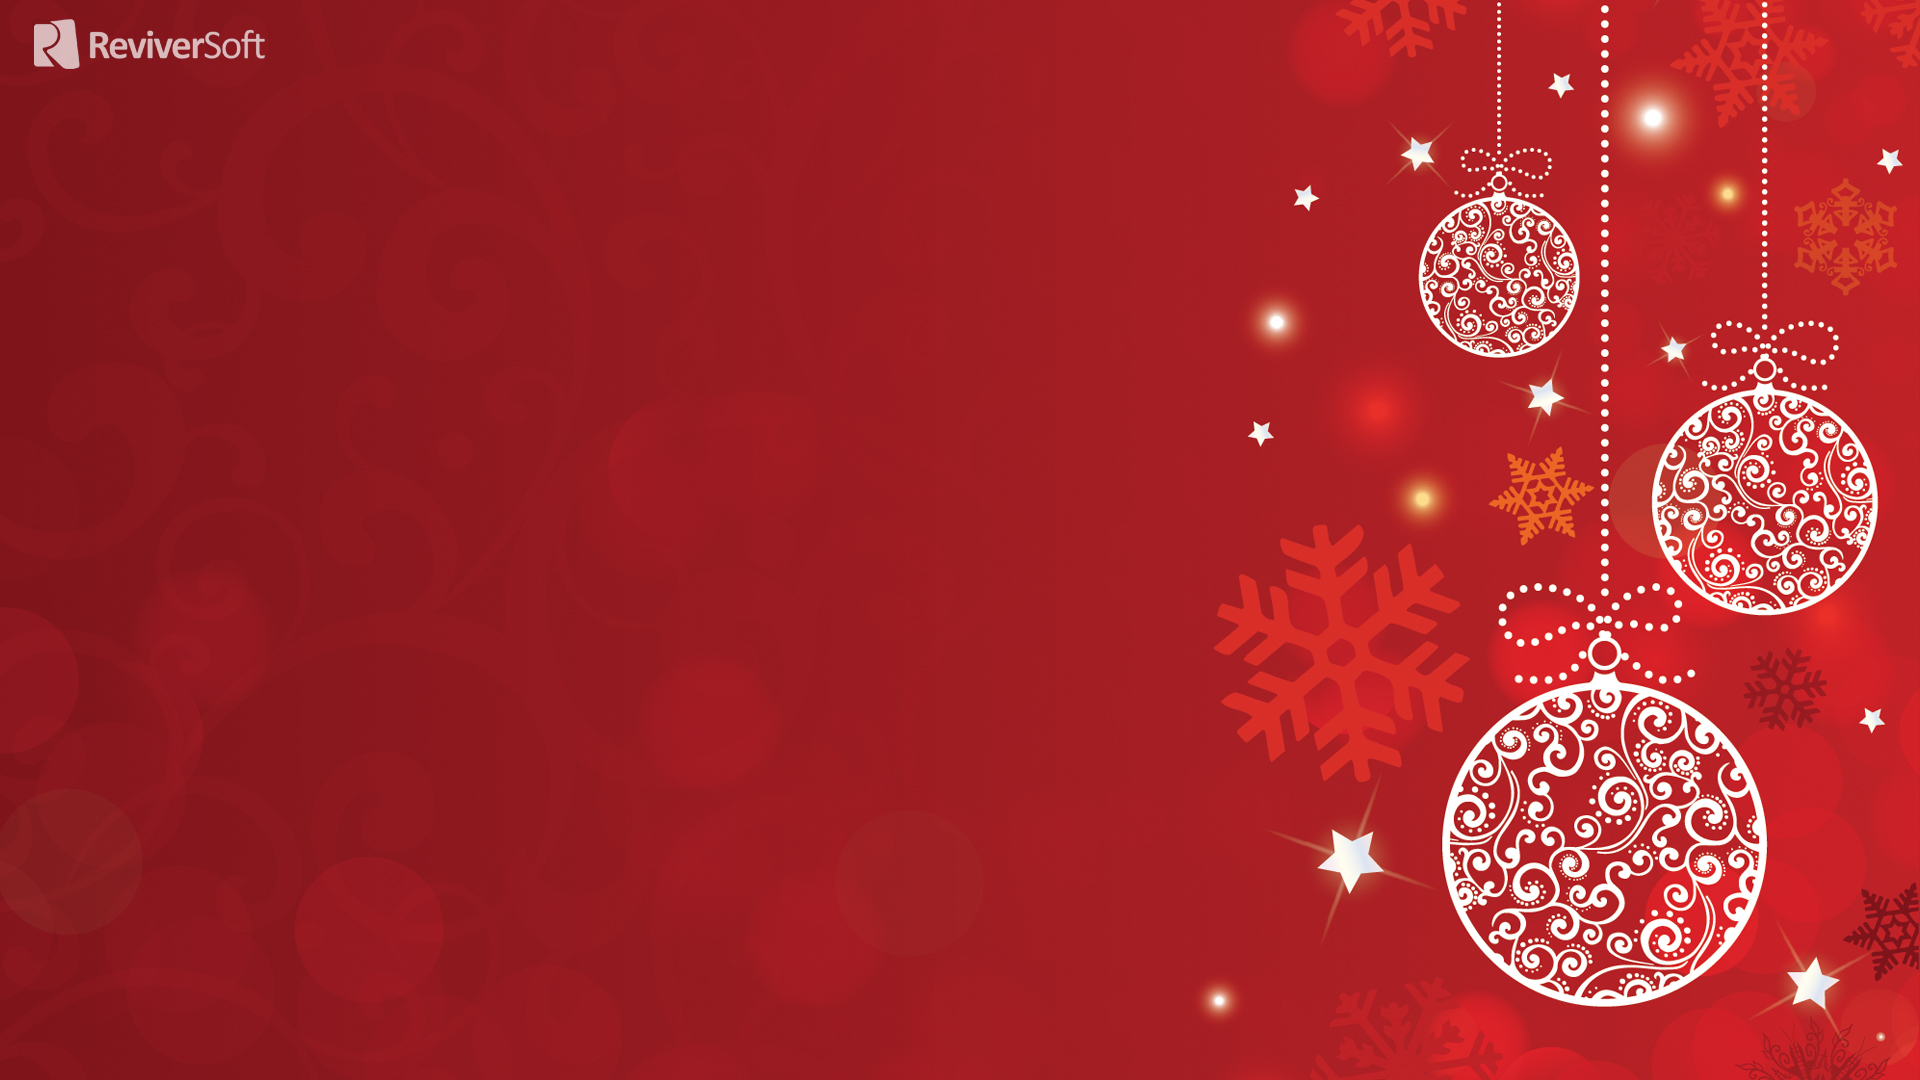 Background On Christmas Wallpaper And Image Pictures